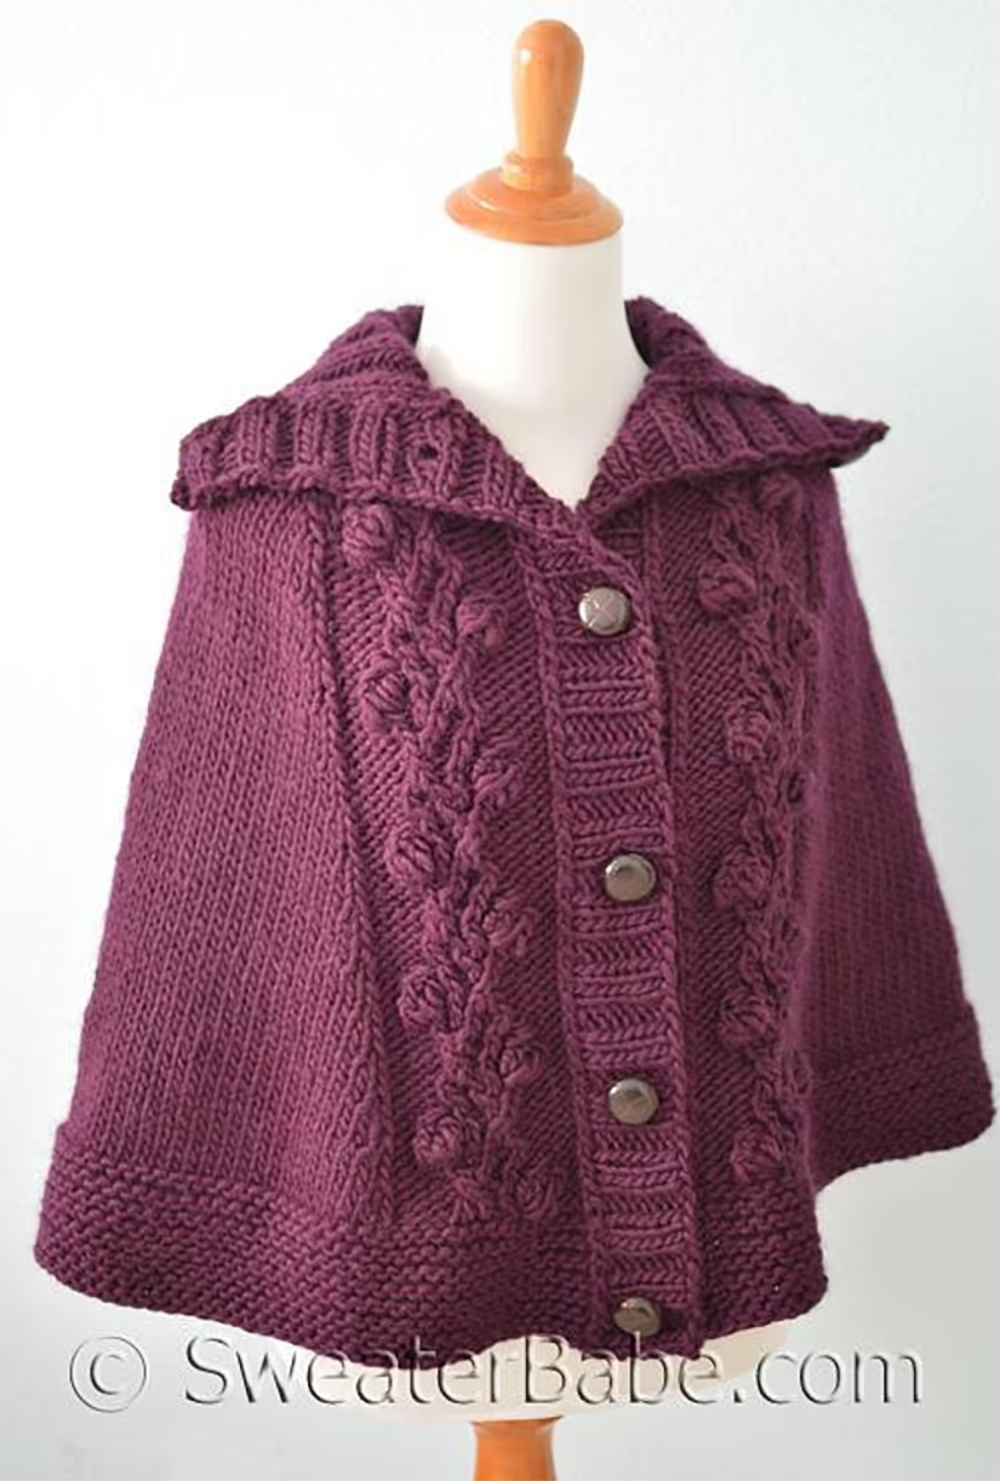 Floral Top-Down Cape Knitting Pattern